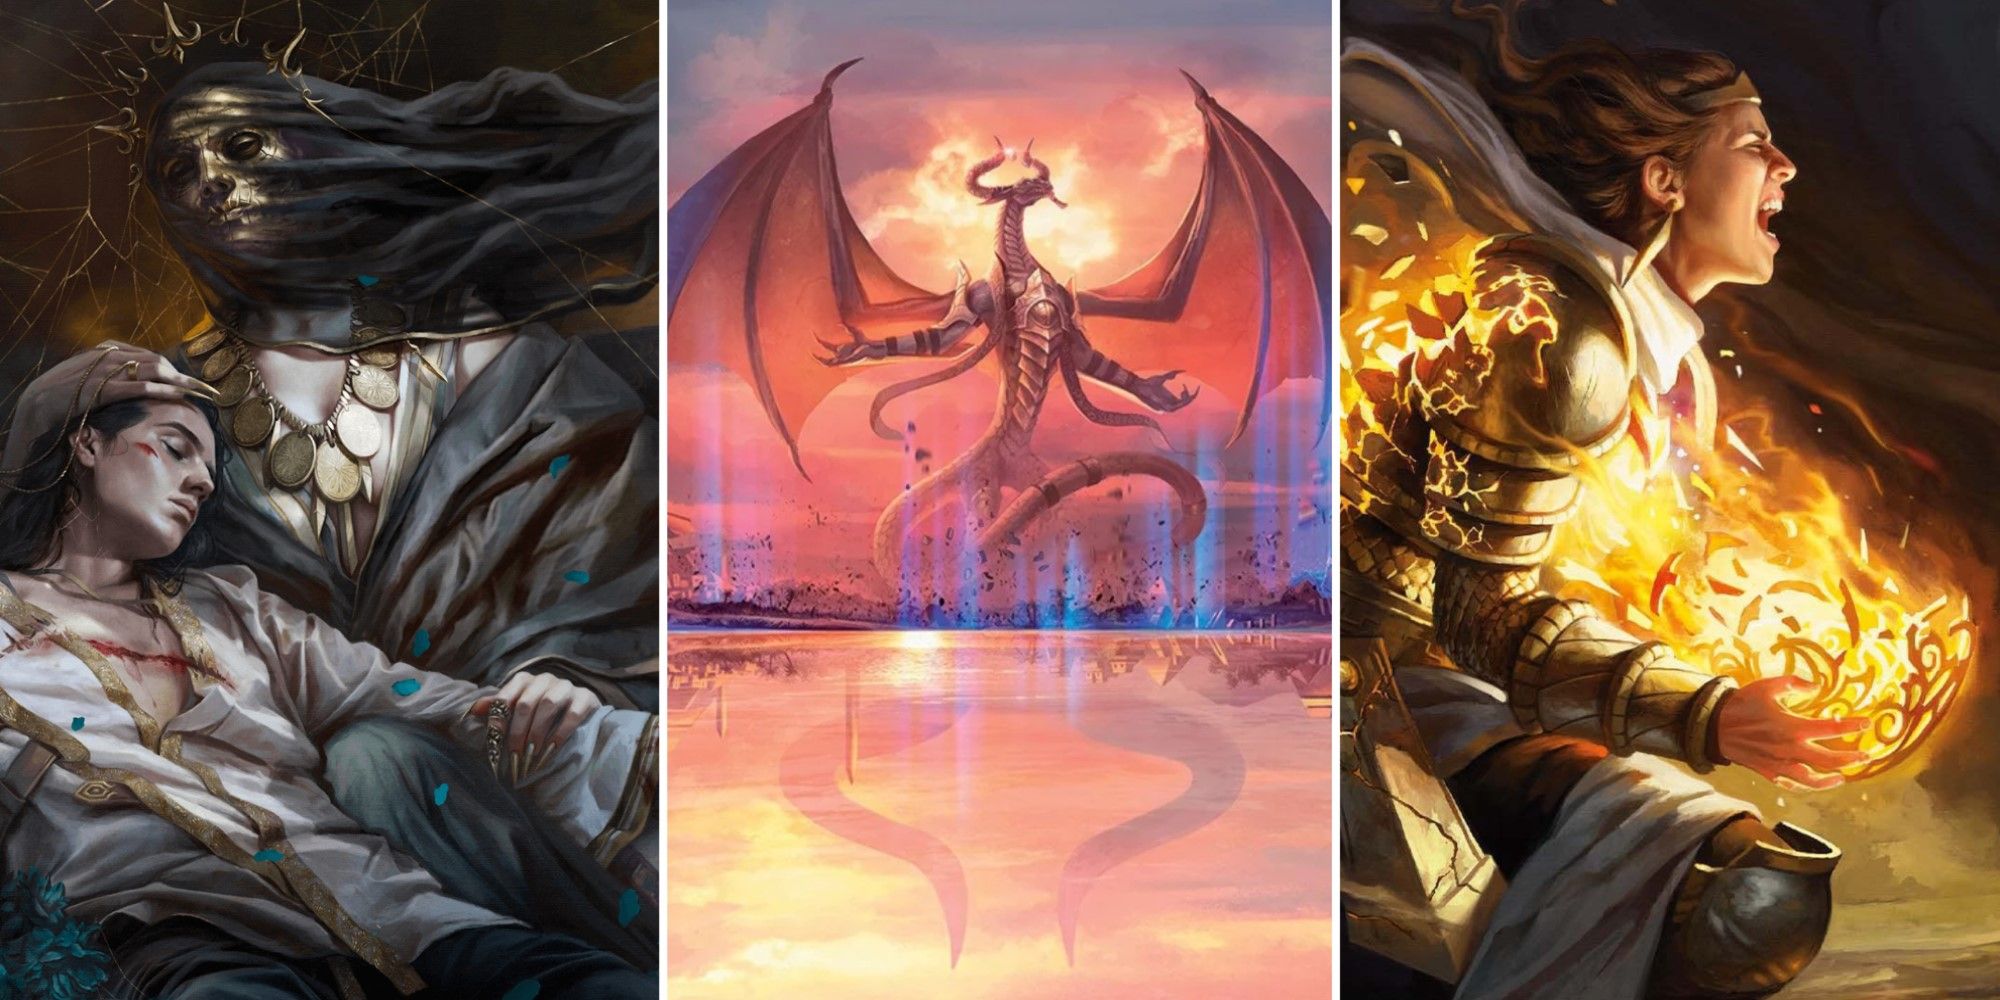 Three pieces of artwork By Magali Villeneuve, for different Magic: The Gathering cards.